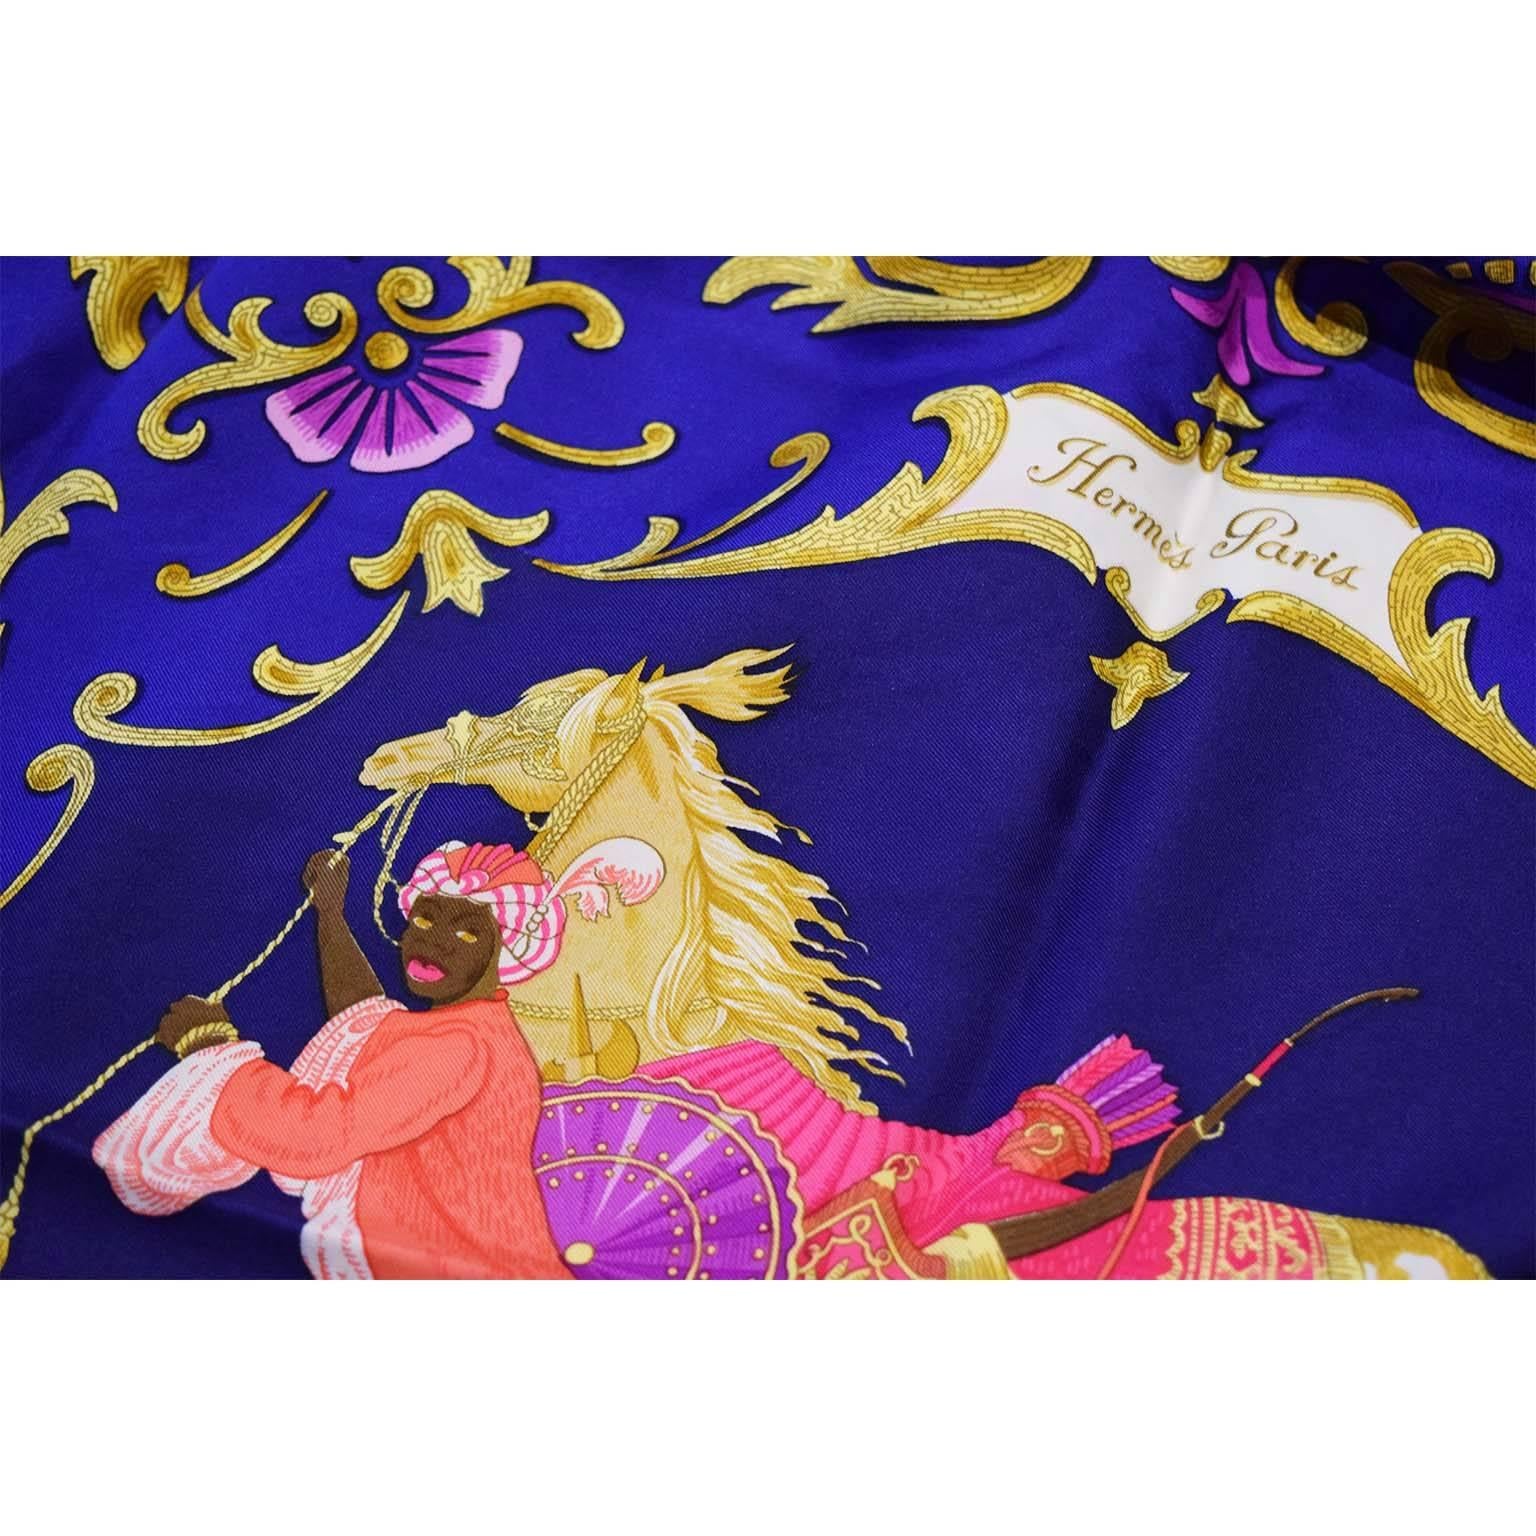 Hermes 'Cheval Turc' vintage scarf. 100% Silk. Made in France. Navy, blue, red, gold, pink, purple shades. Designed by Christiane Vauzelles for Hermes in 1969. No box.

Details:
Creator: Christiane Vauzelles for Hermes
Place of origin: